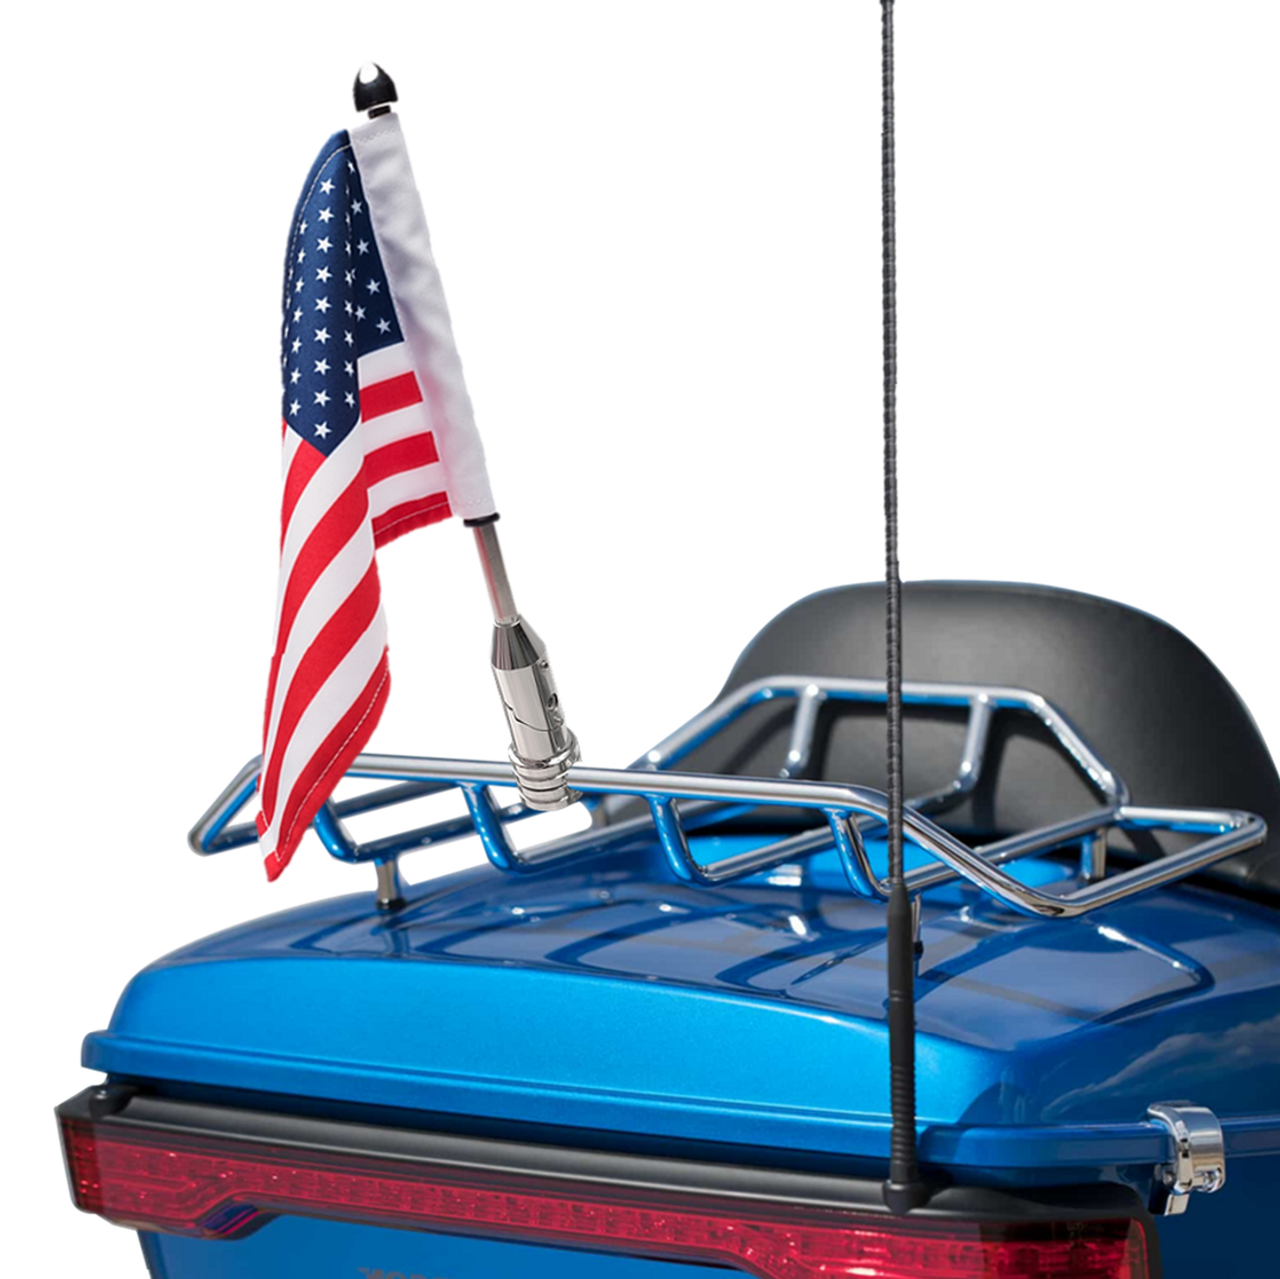 Folding mount with 9" pole, standard cone topper and
6"x9" USA flag on Harley Tour Pack Rack (rack not included)